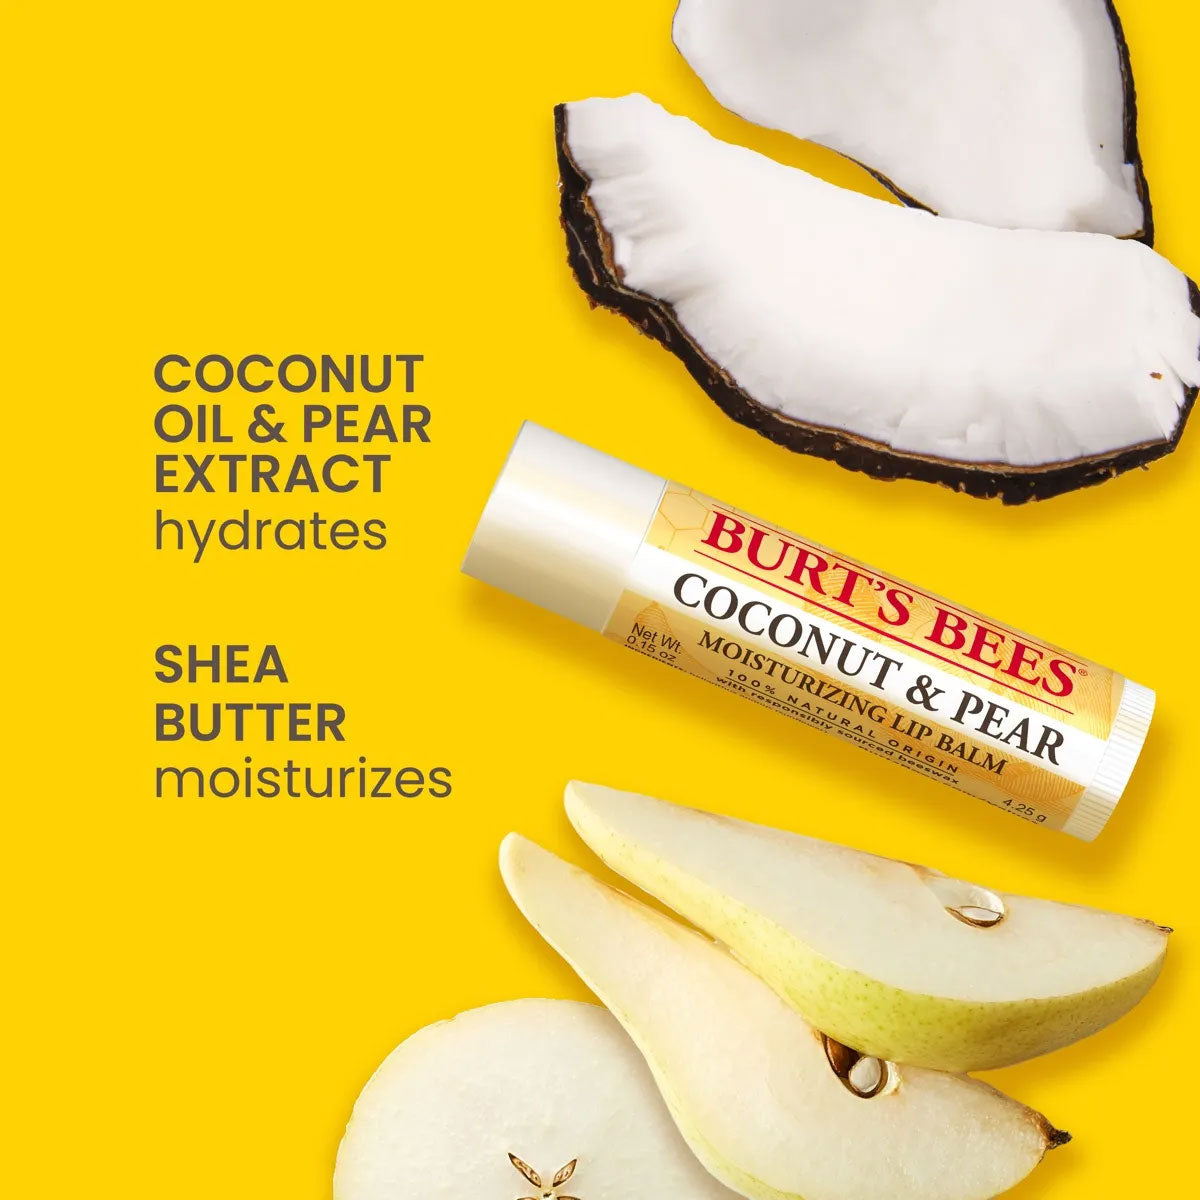 Bálsamo labial Blister Coconut & Pear Burt’s Bees 4 gr - 🐝🍃 producto 100% natural